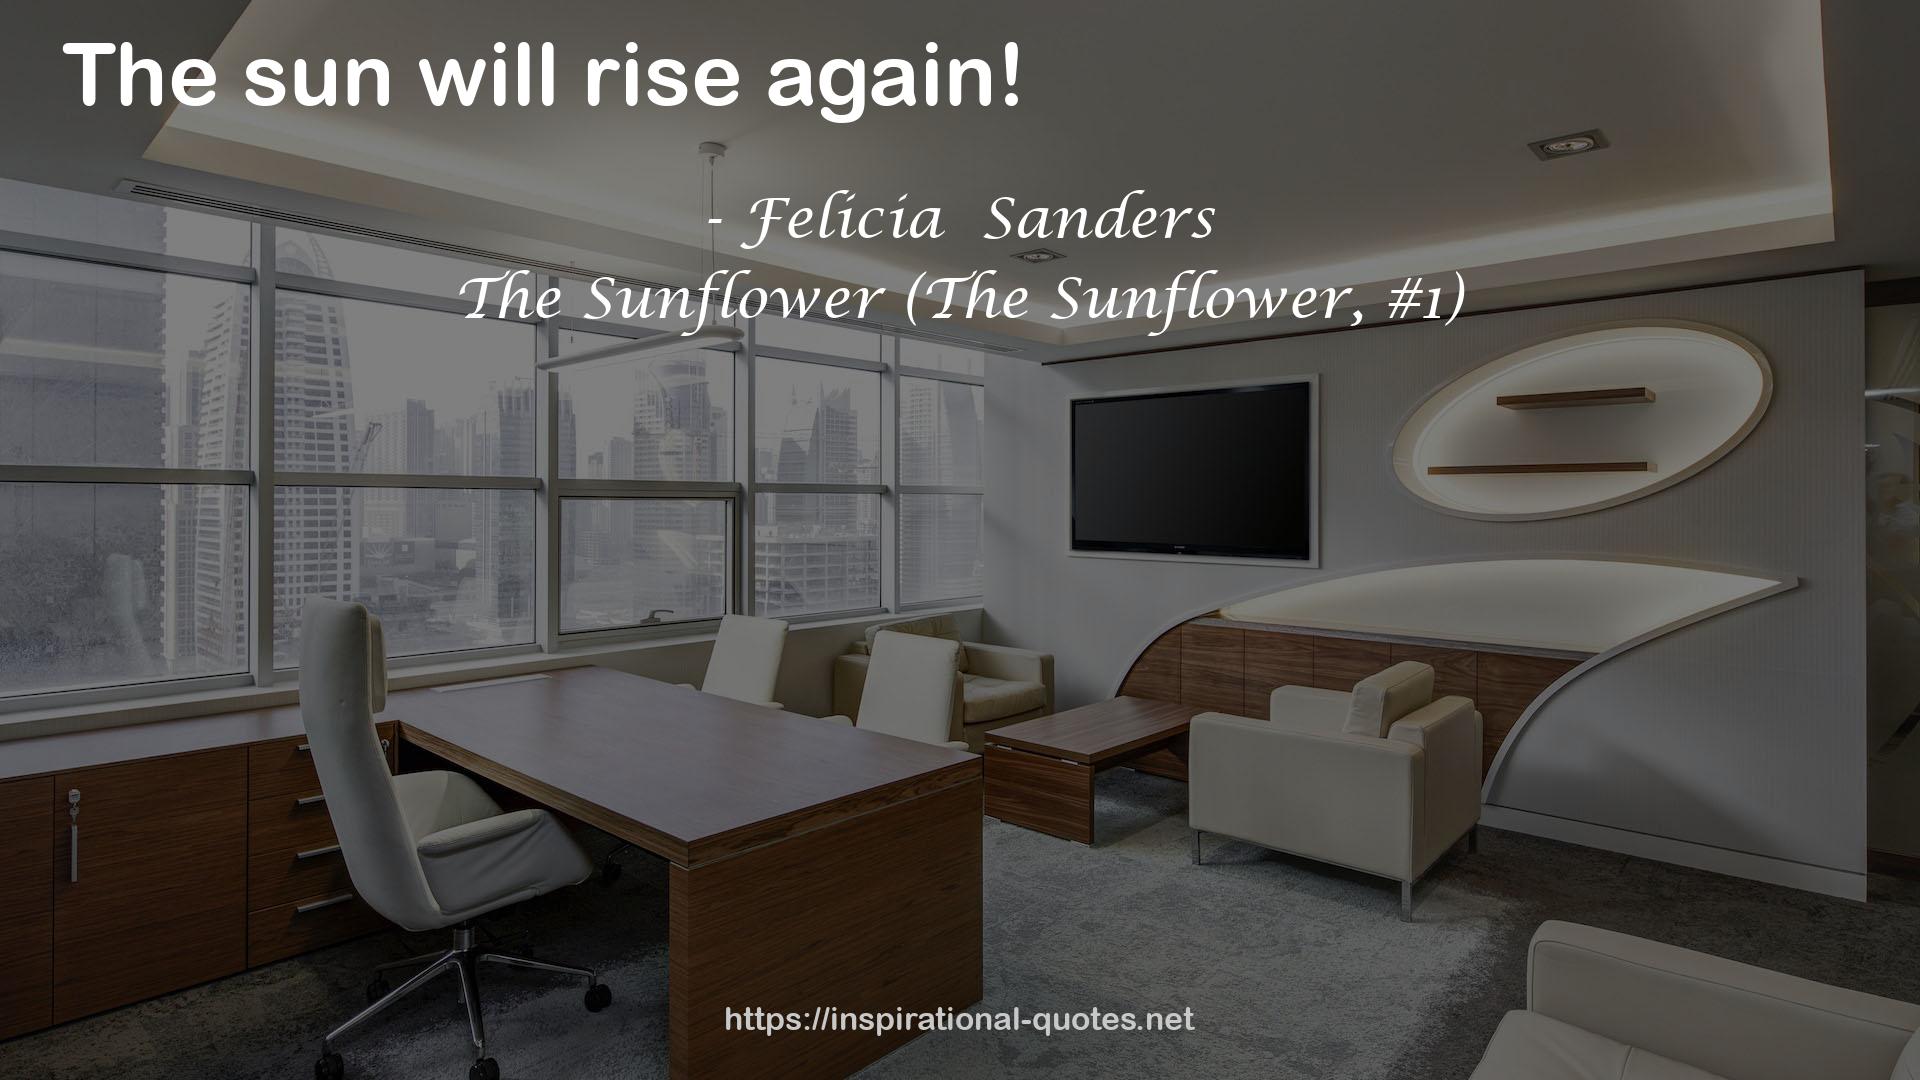 The Sunflower (The Sunflower, #1) QUOTES